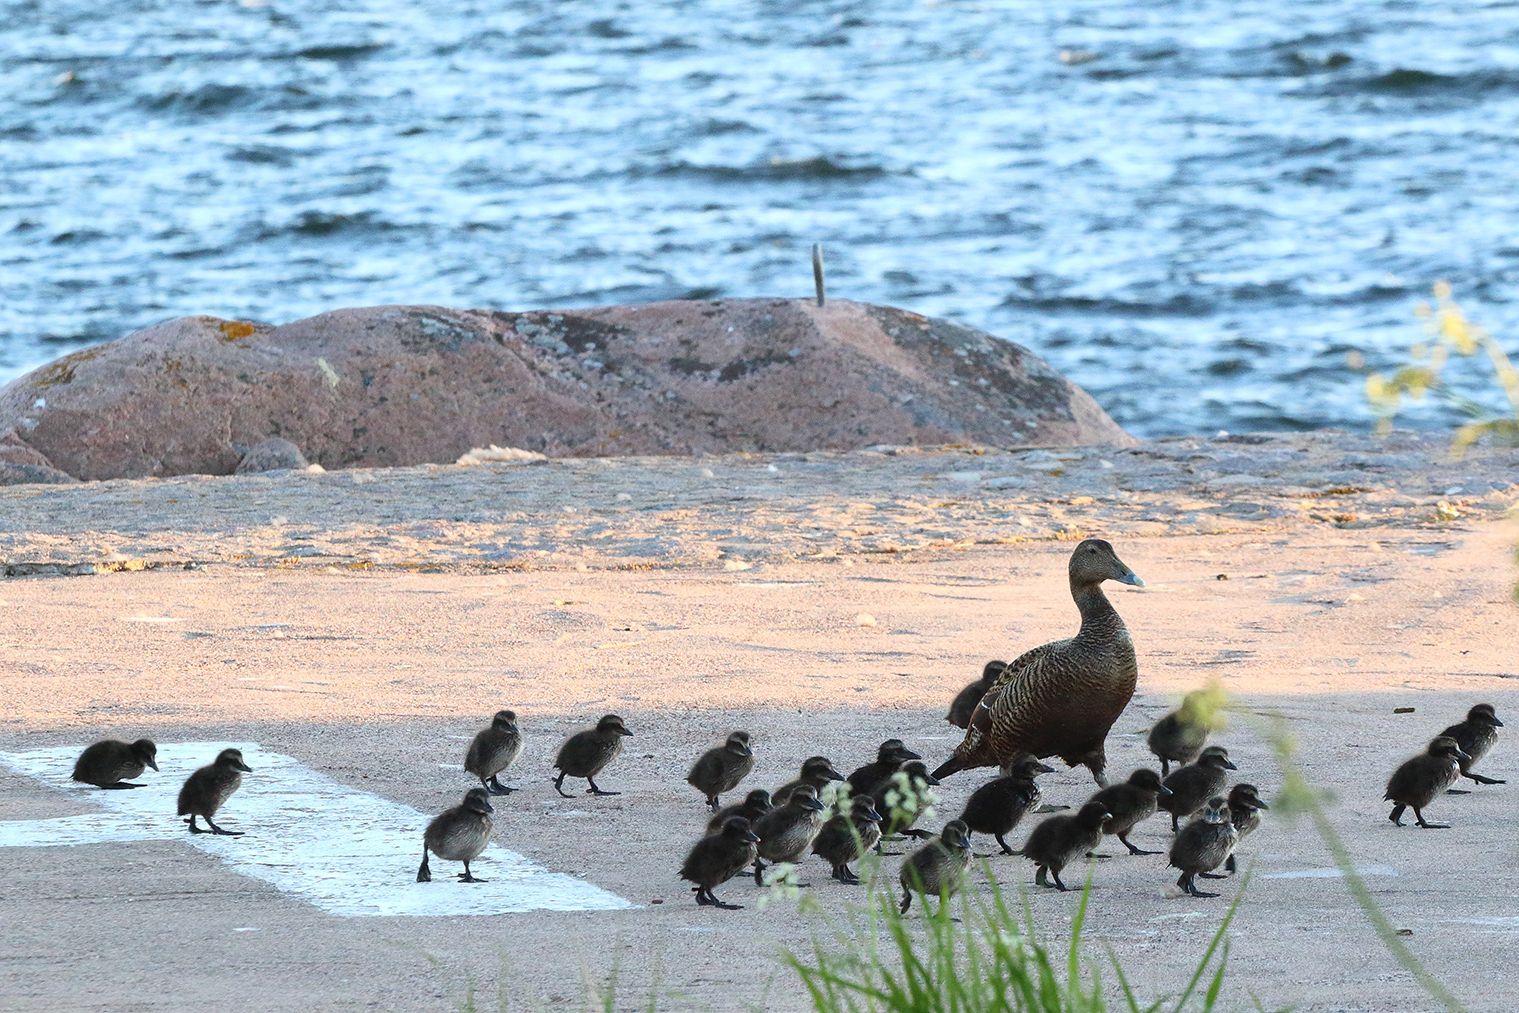 A mother duck walks with a group of ducklings along the beach.